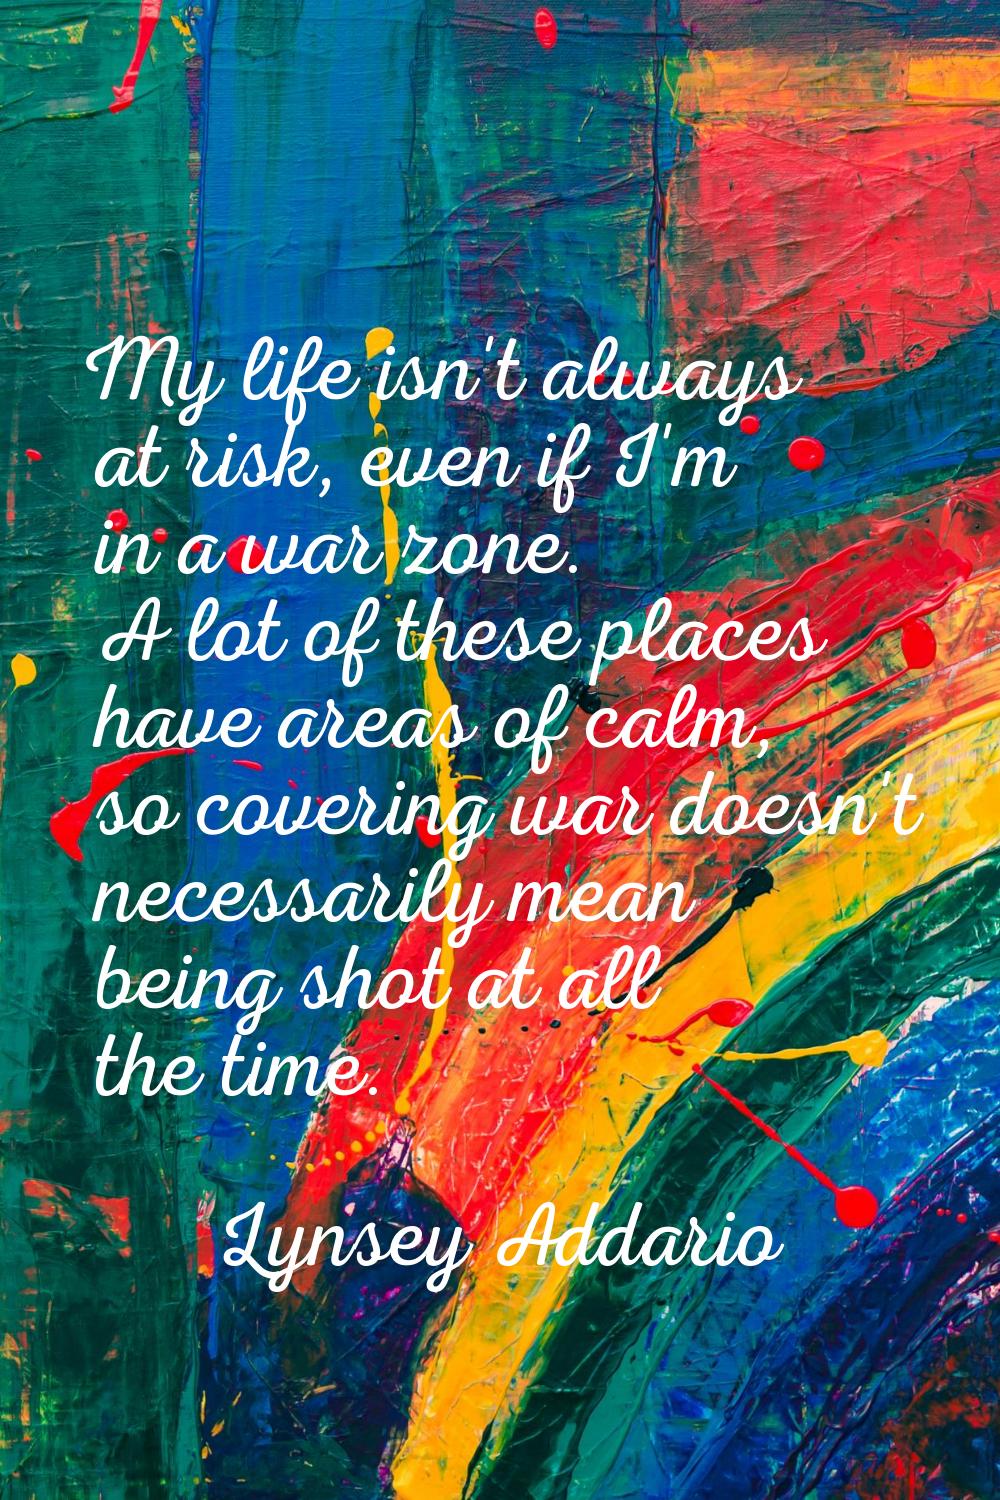 My life isn't always at risk, even if I'm in a war zone. A lot of these places have areas of calm, 